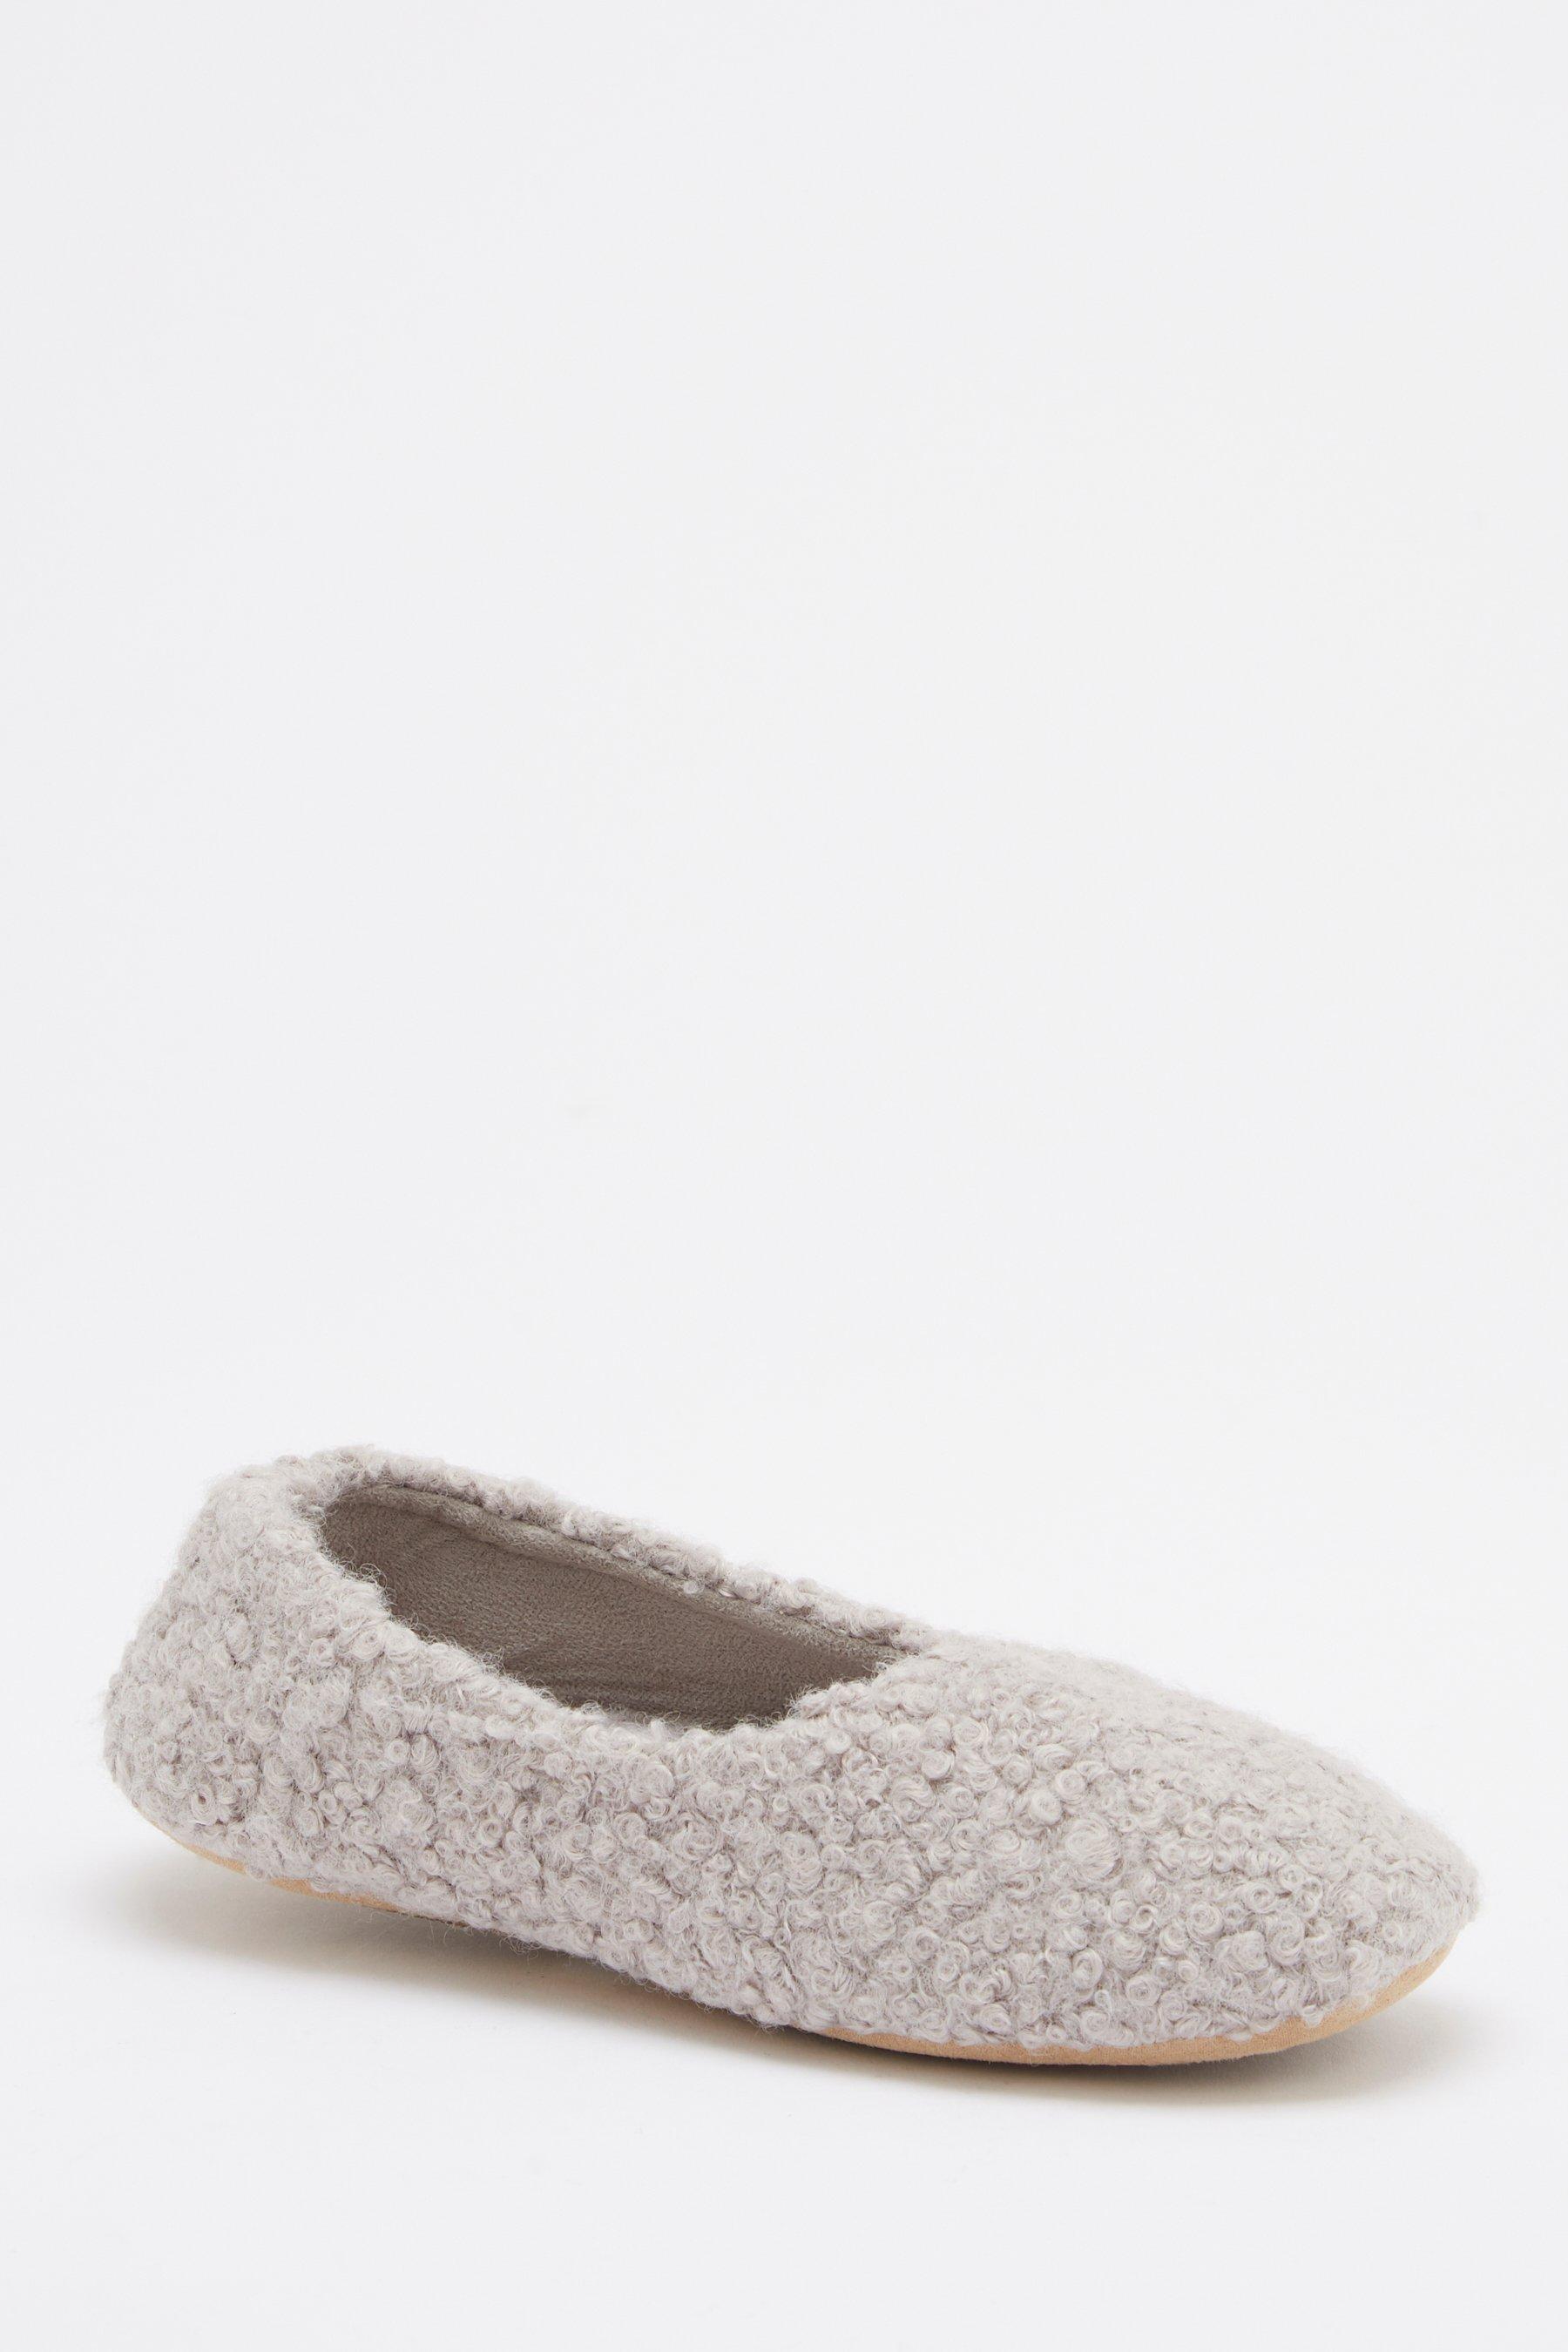 clarks cozily curl ballerina slippers - womens - grey - size: 4